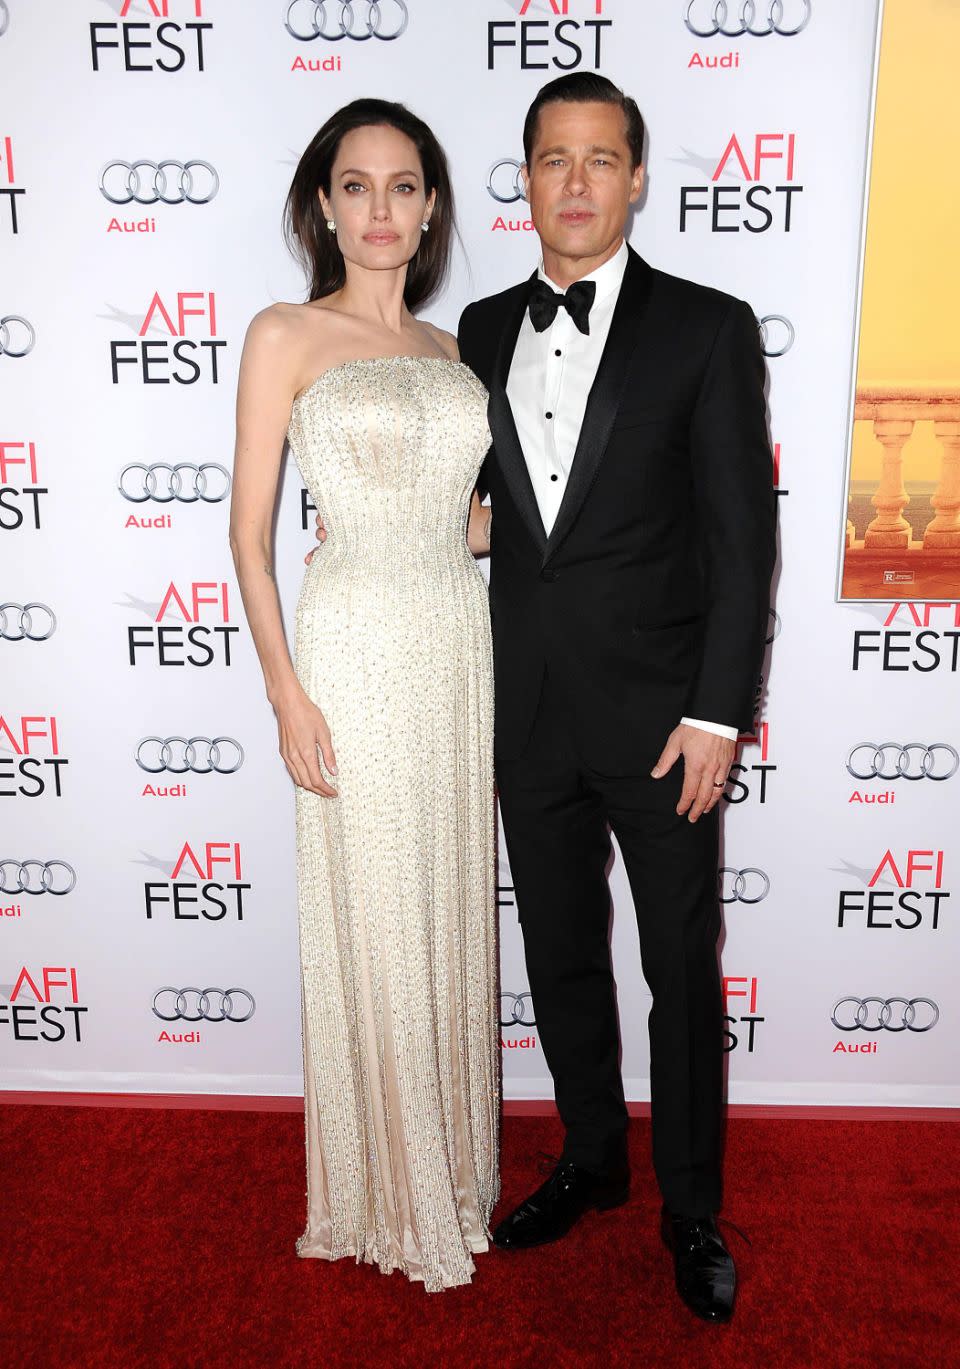 Ange, who split from Brad Pitt last year, previously had a double mastectomy and her ovaries removed. Source: Getty